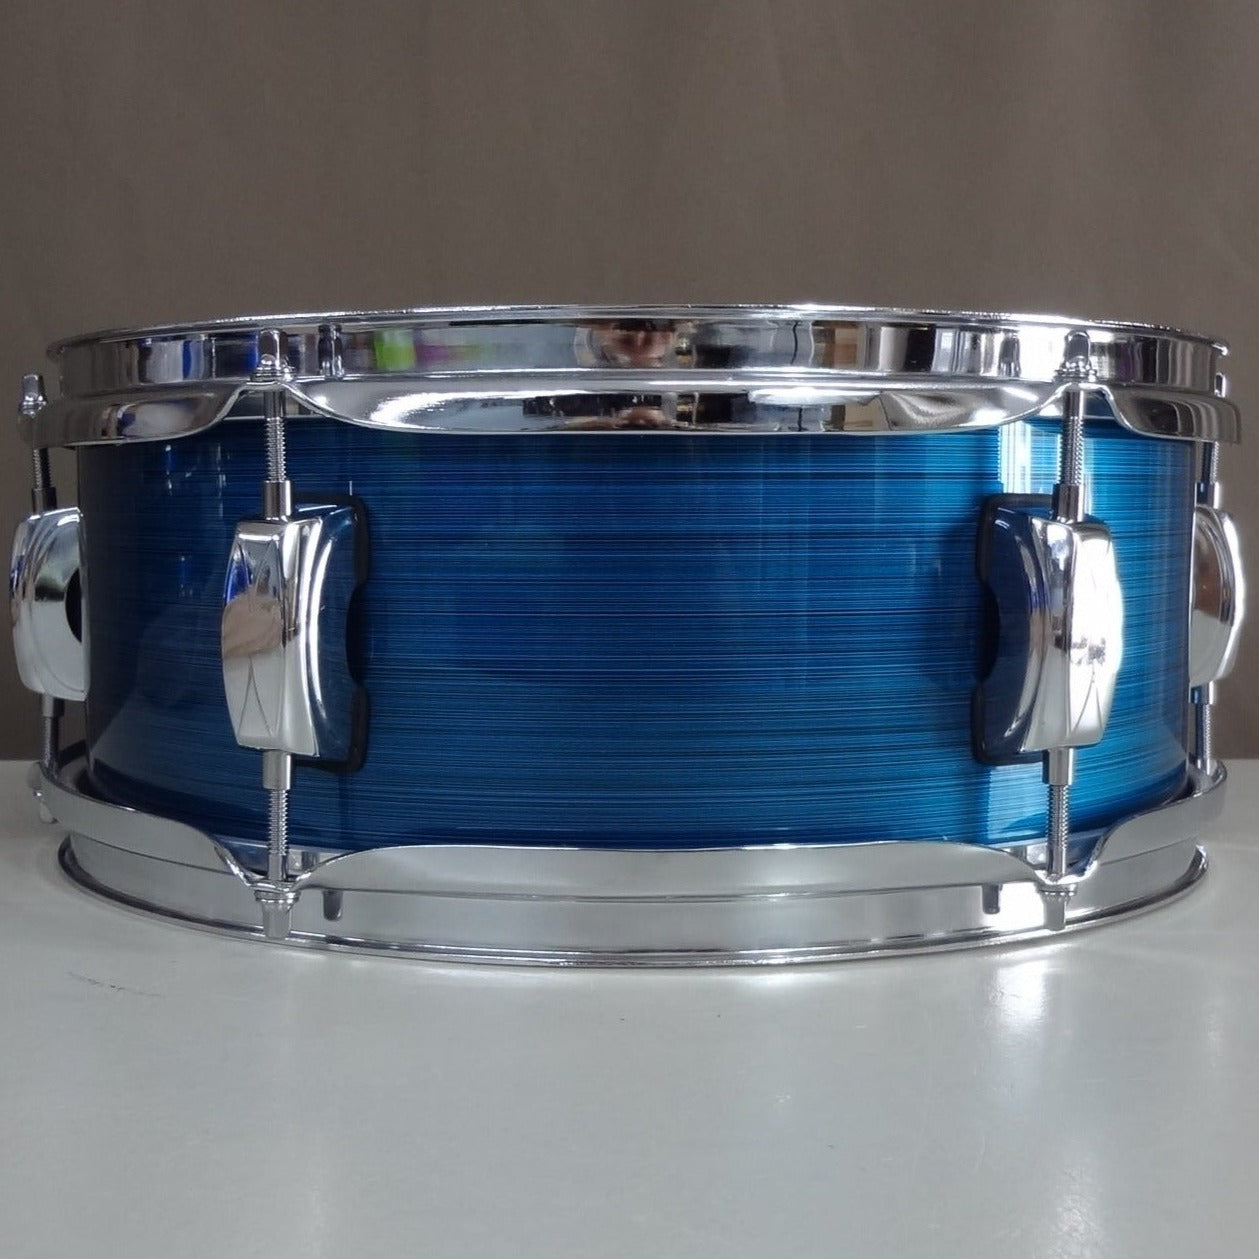 New 13 Inch Custom Electronic Snare Drum - Teal Strata